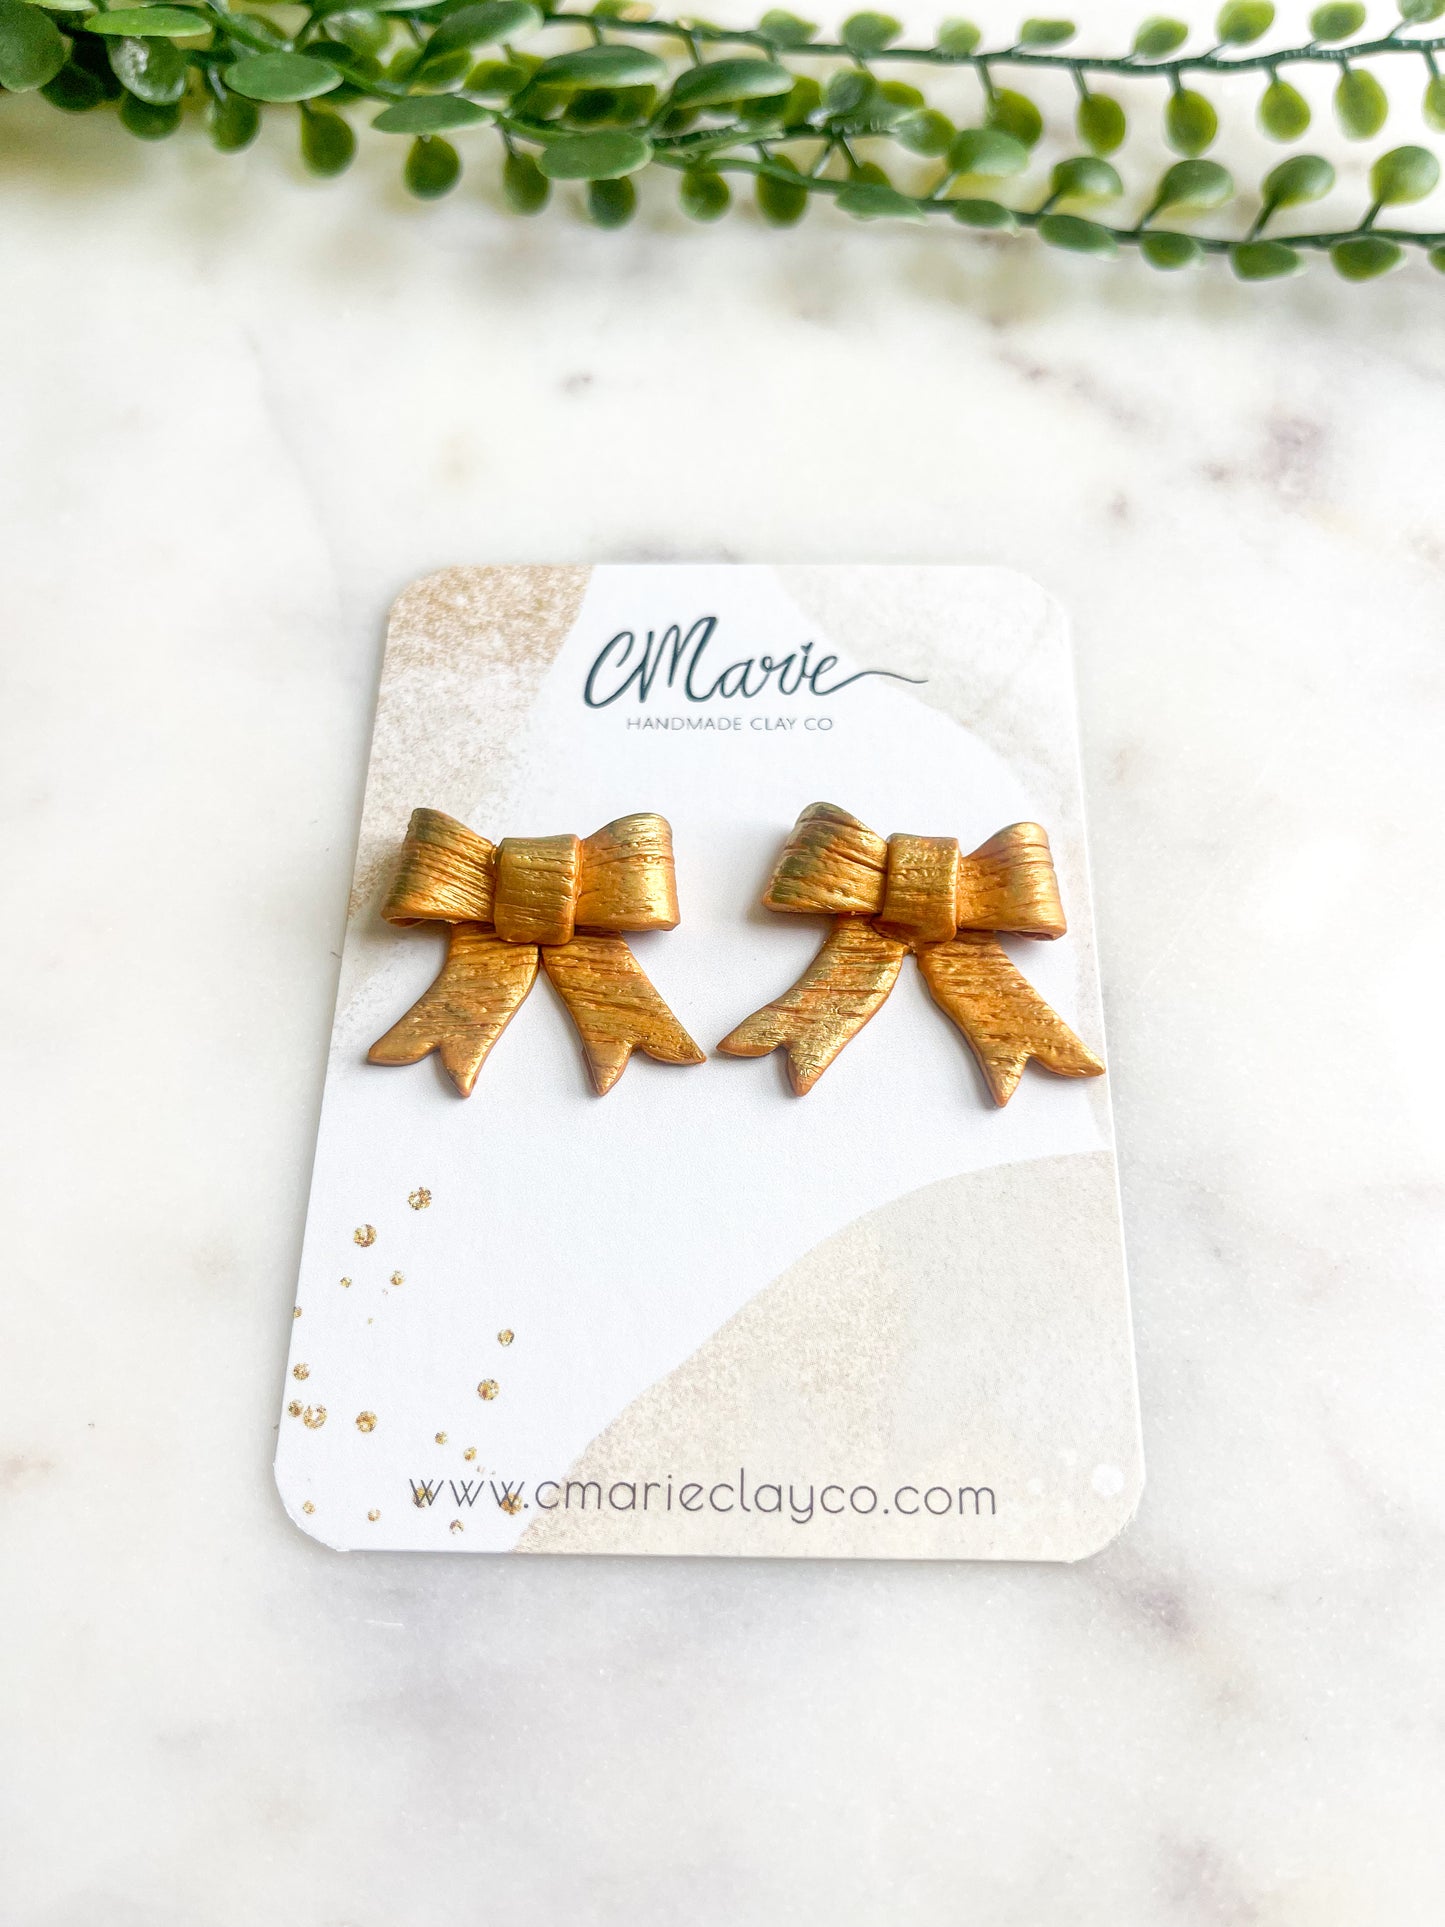 Brushed Gold Clay Bows